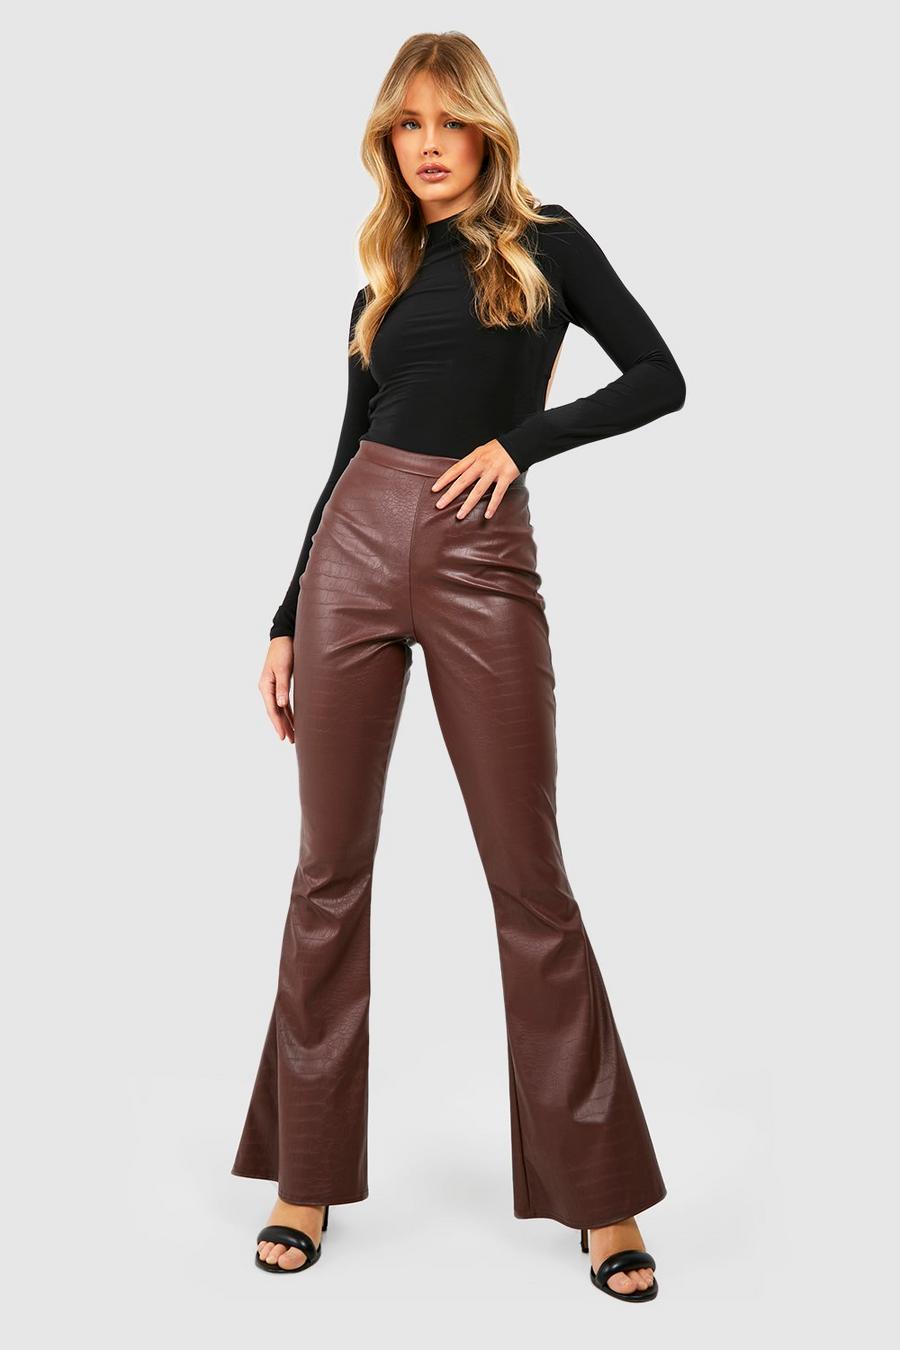 Chocolate brun Croc Faux Leather High Waisted Flared Trousers